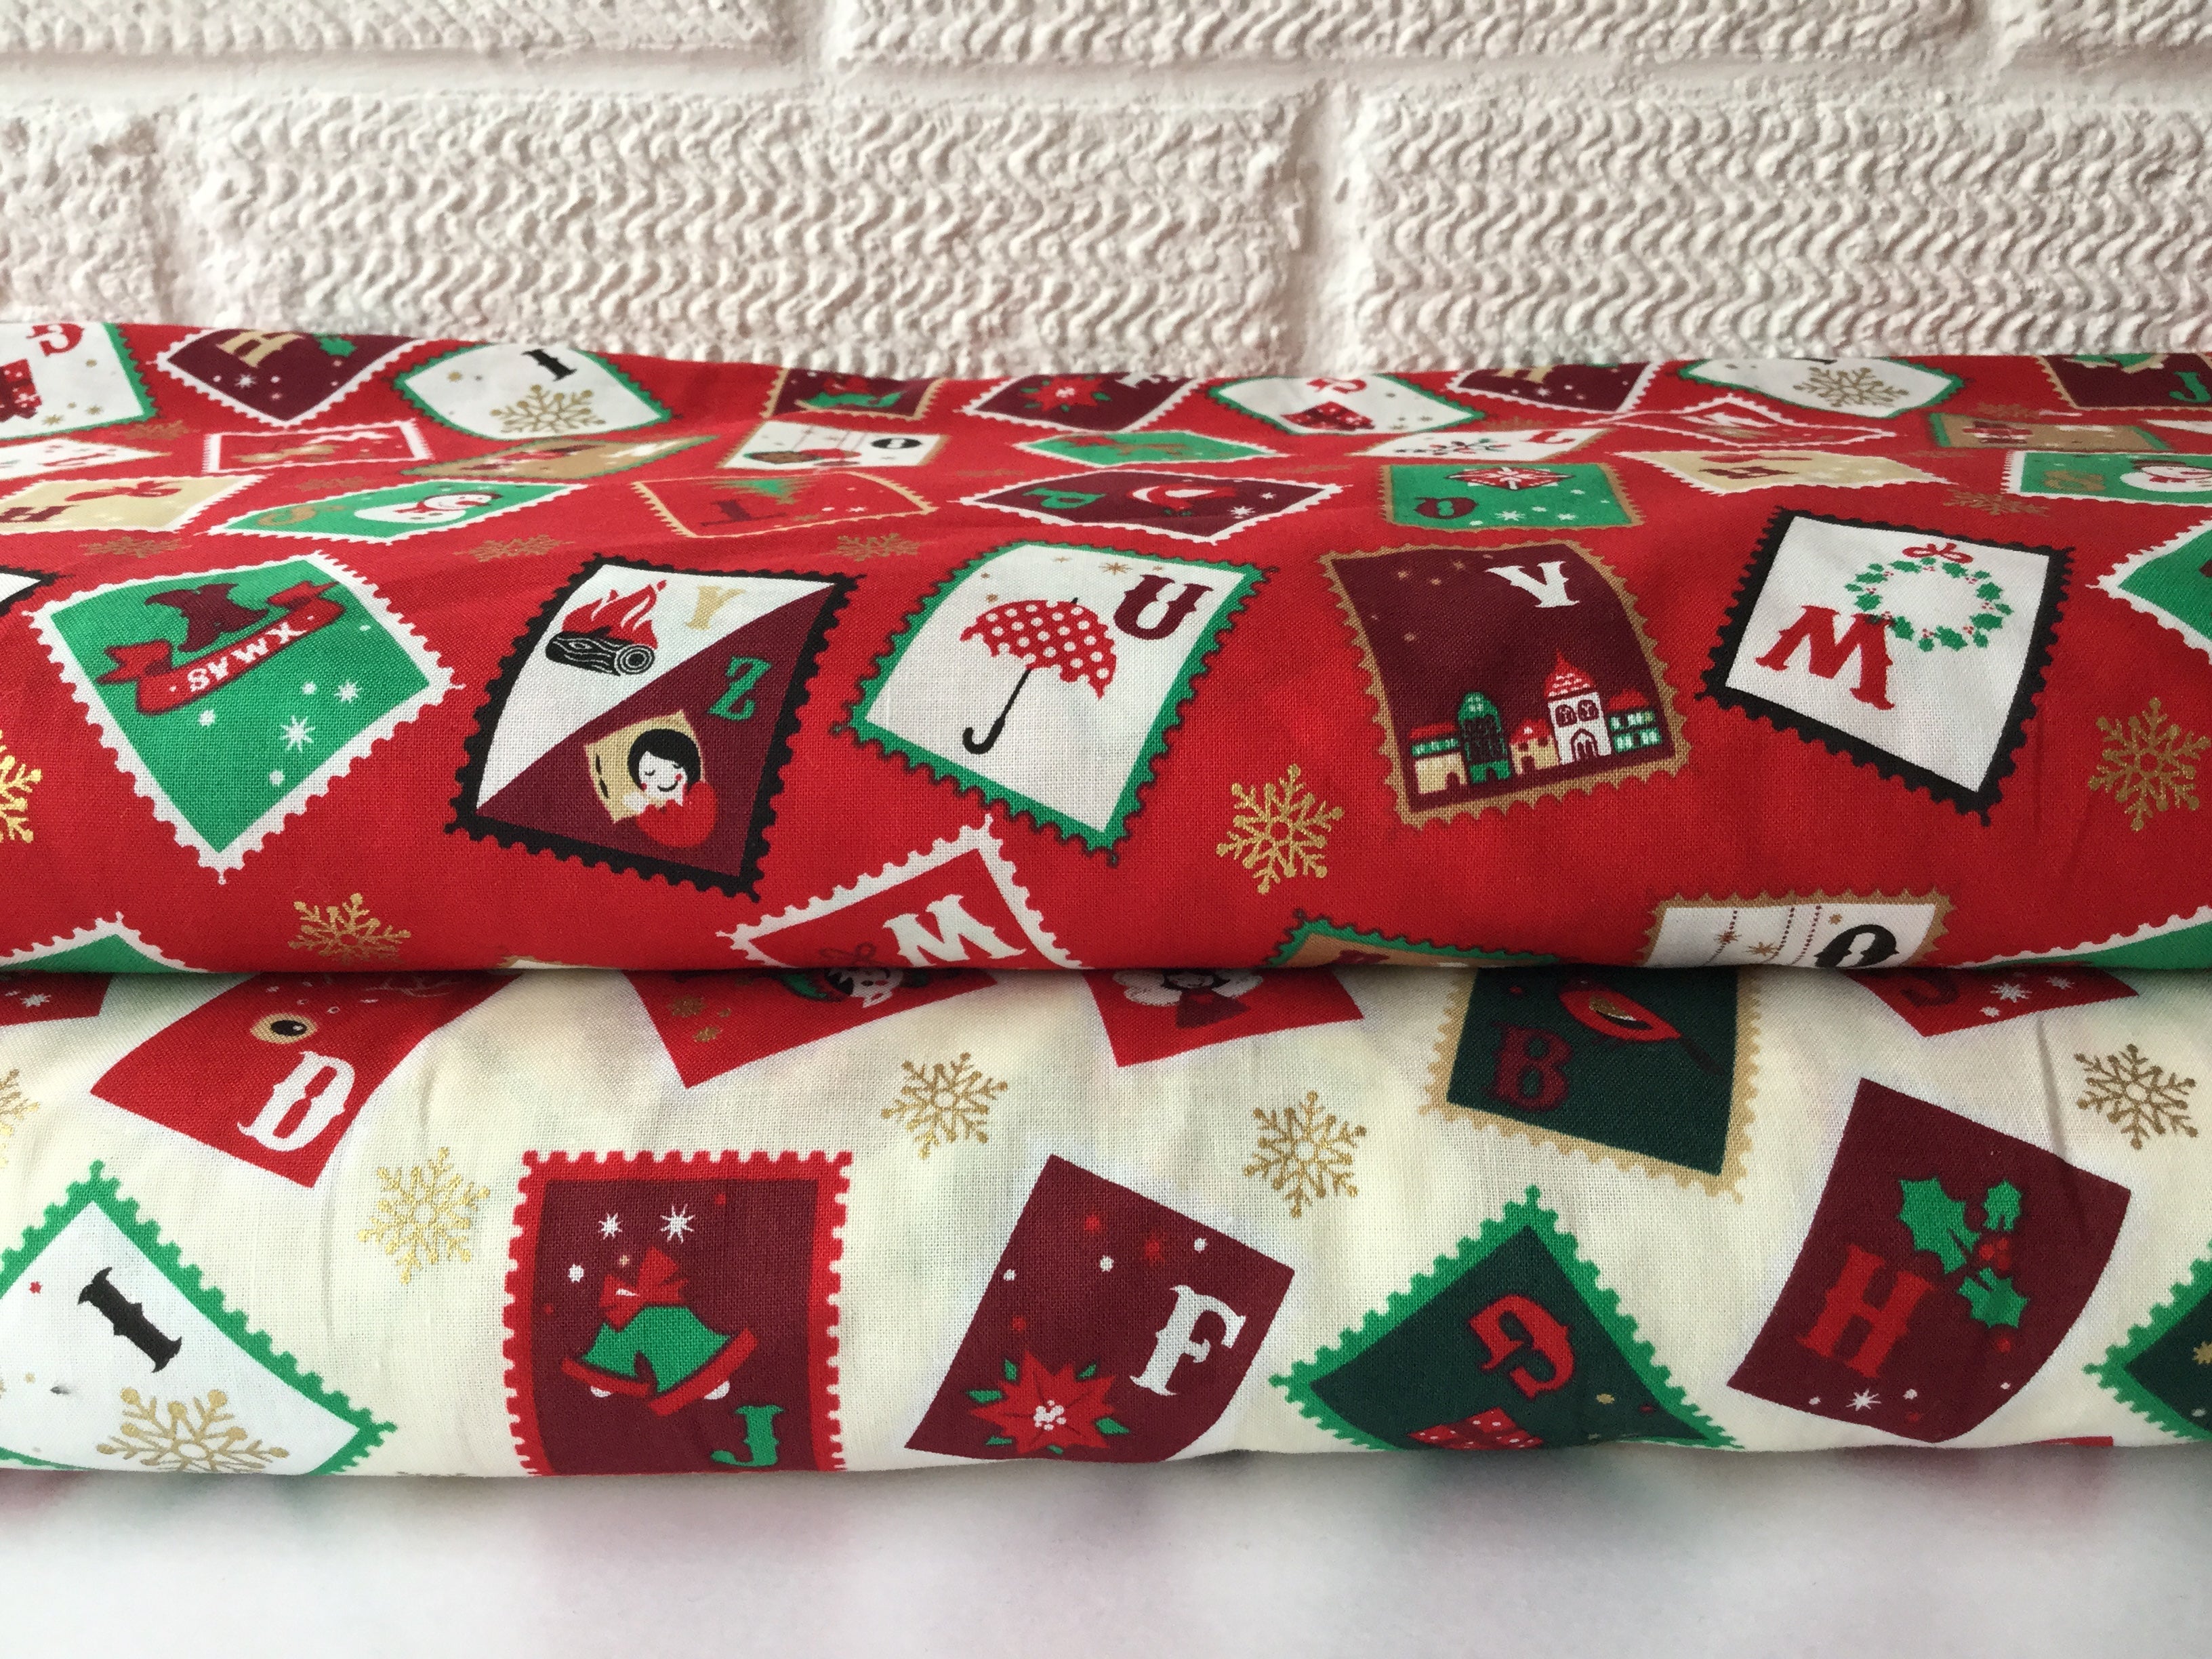 Christmas cotton fabrics with a festive stamps theme